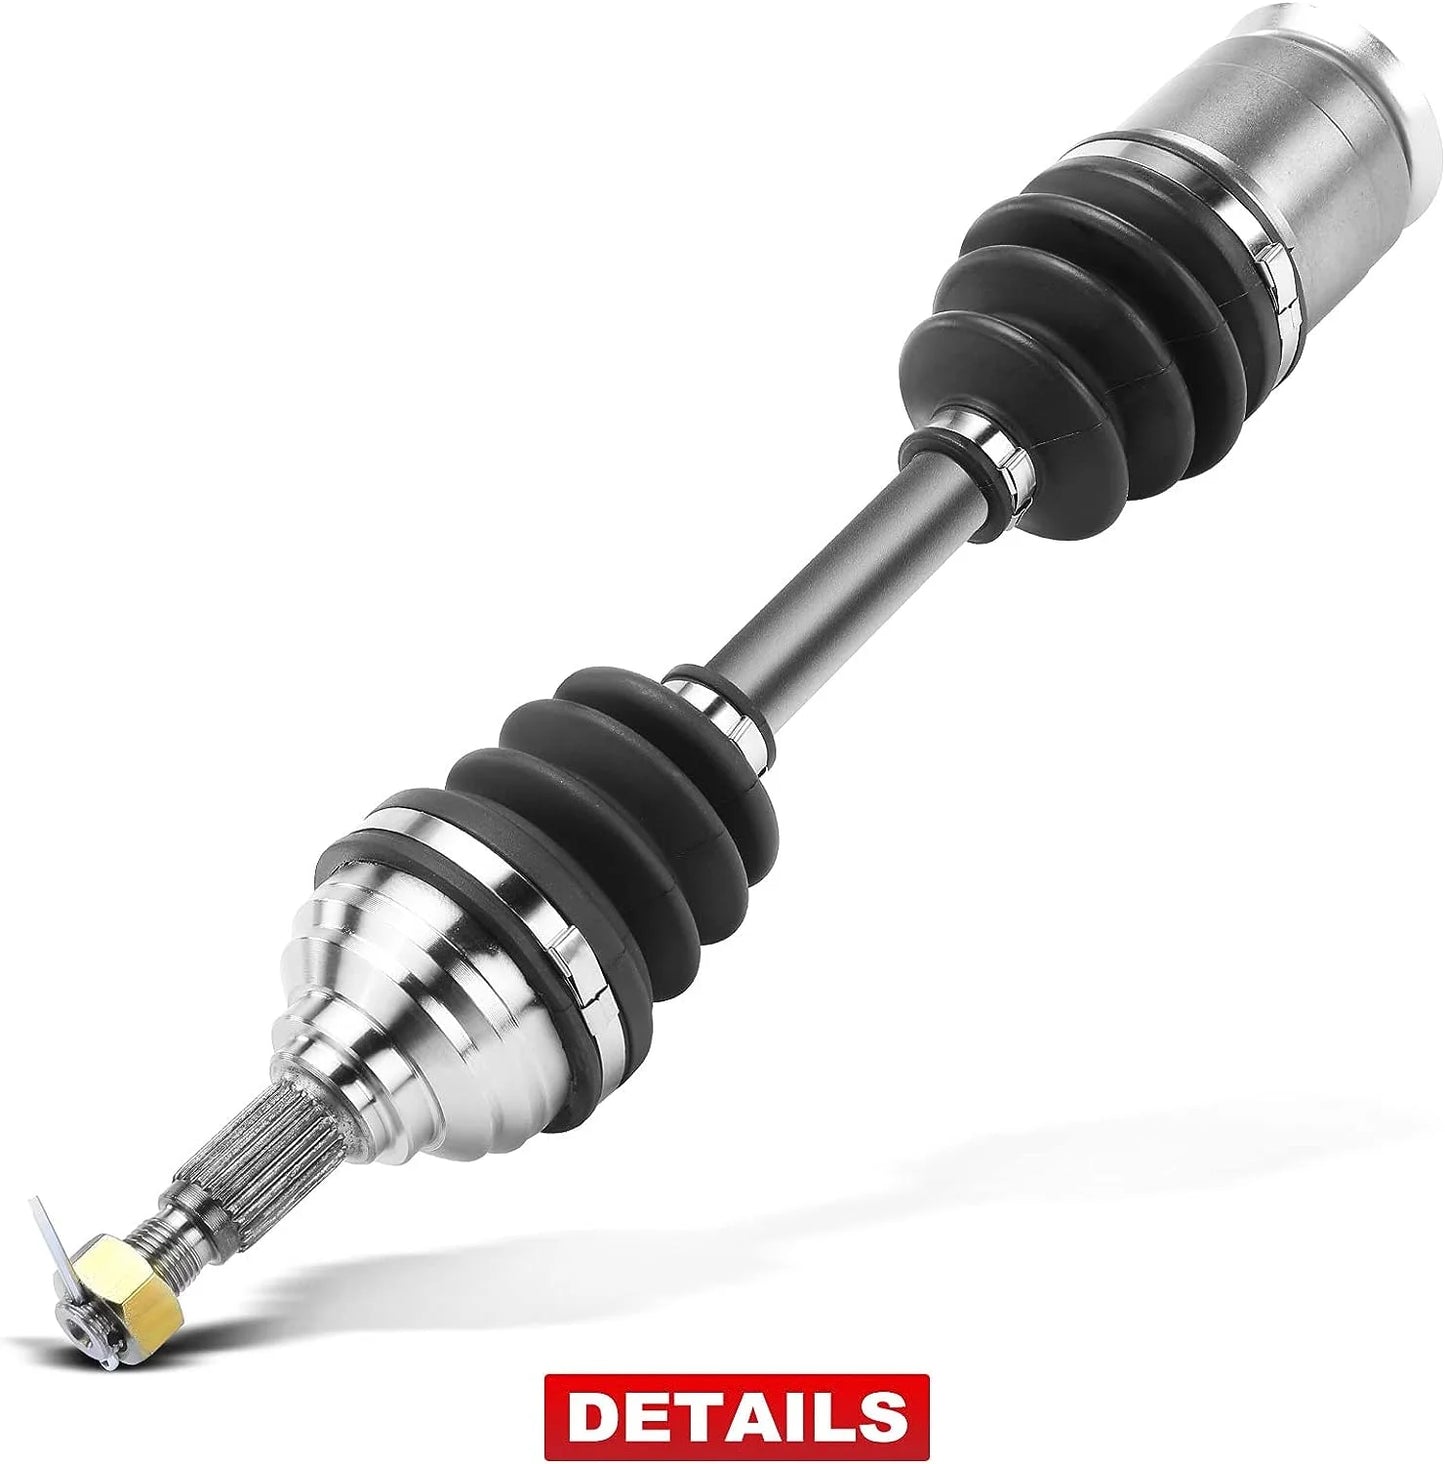 A-Premium CV Axle Shaft Assembly Compatible with Arctic Cat 250 2x4/4x4, 300 2x4/4x4/4x4 MRP, 1999-2004, Rear Left or Right, Replace# 1402-002, 1502-531